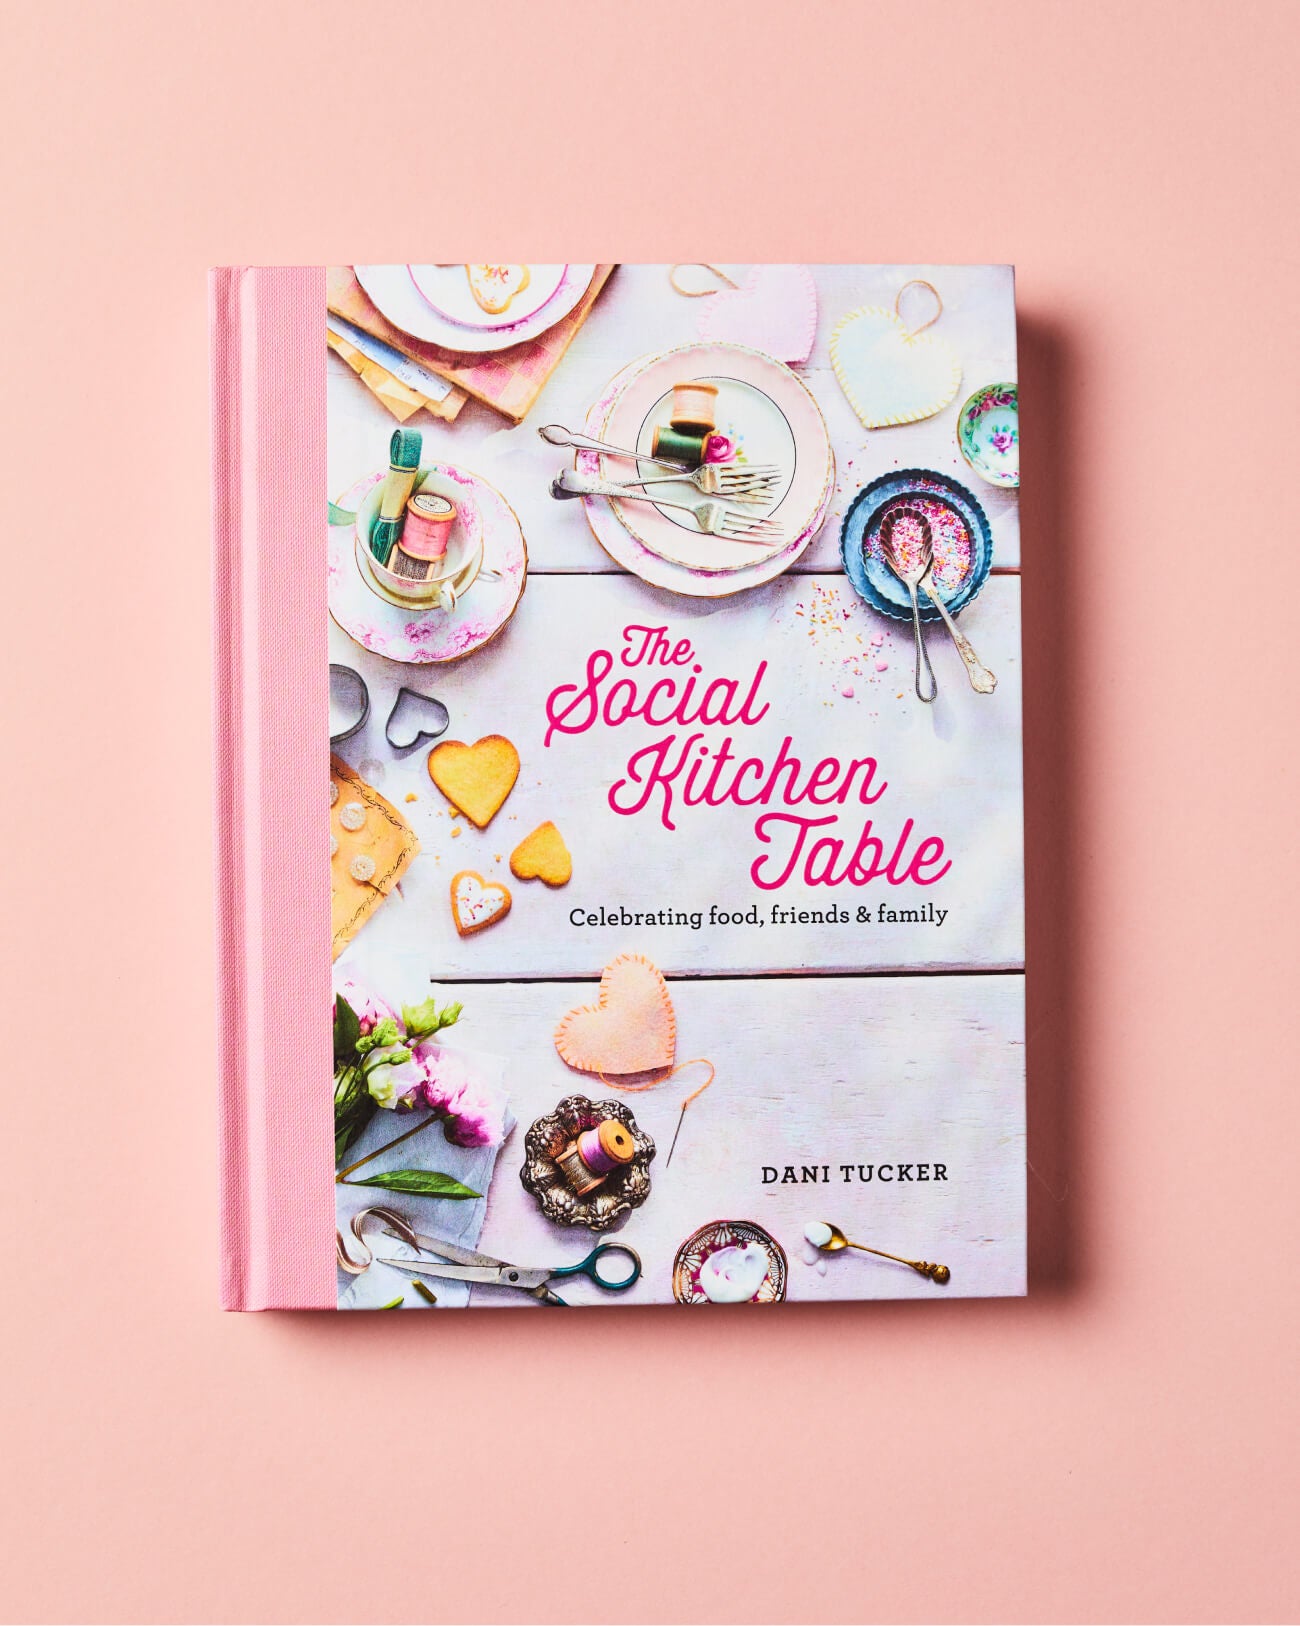 The Social Kitchen Table Cookbook by Dani Tucker on a pink background